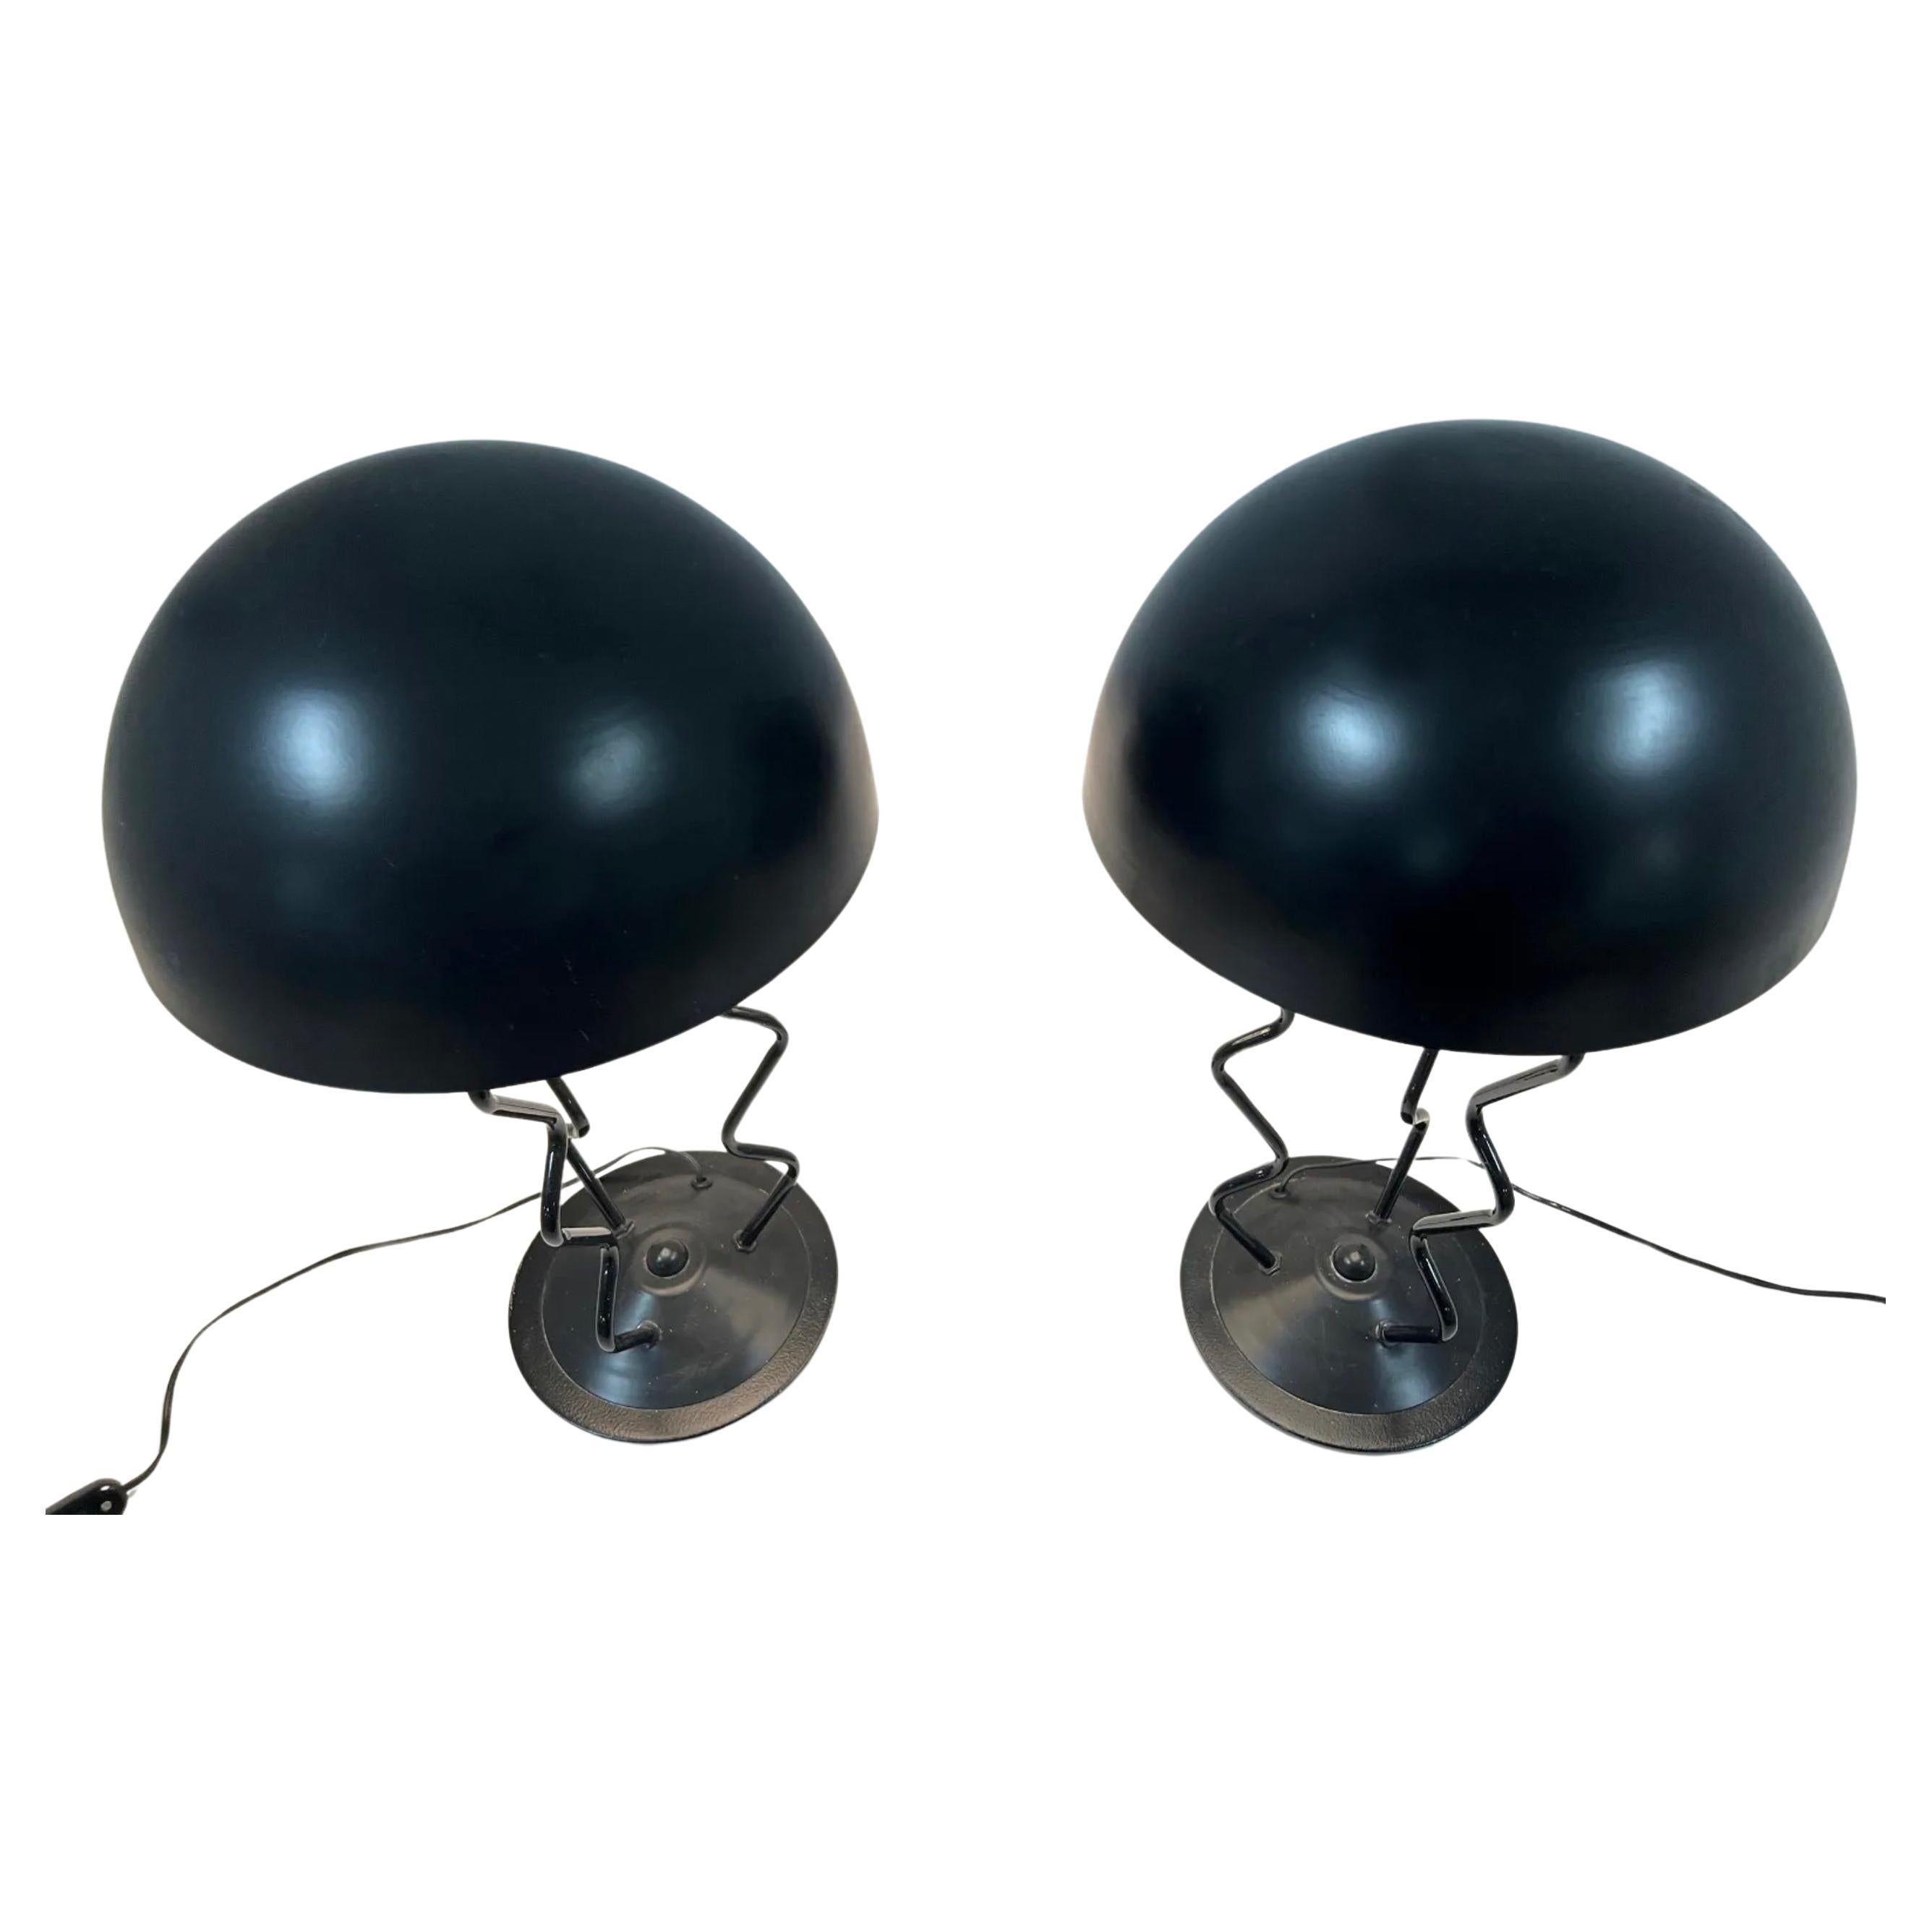 Pair of Memphis style Post modern steel squiggle lamps Black finish with large steel dome shades. Good vintage condition. Both Lamps work fine with a standard 120v American cord. Each lamp takes (1) standard Edison Socket light bulb. 

Dimensions: